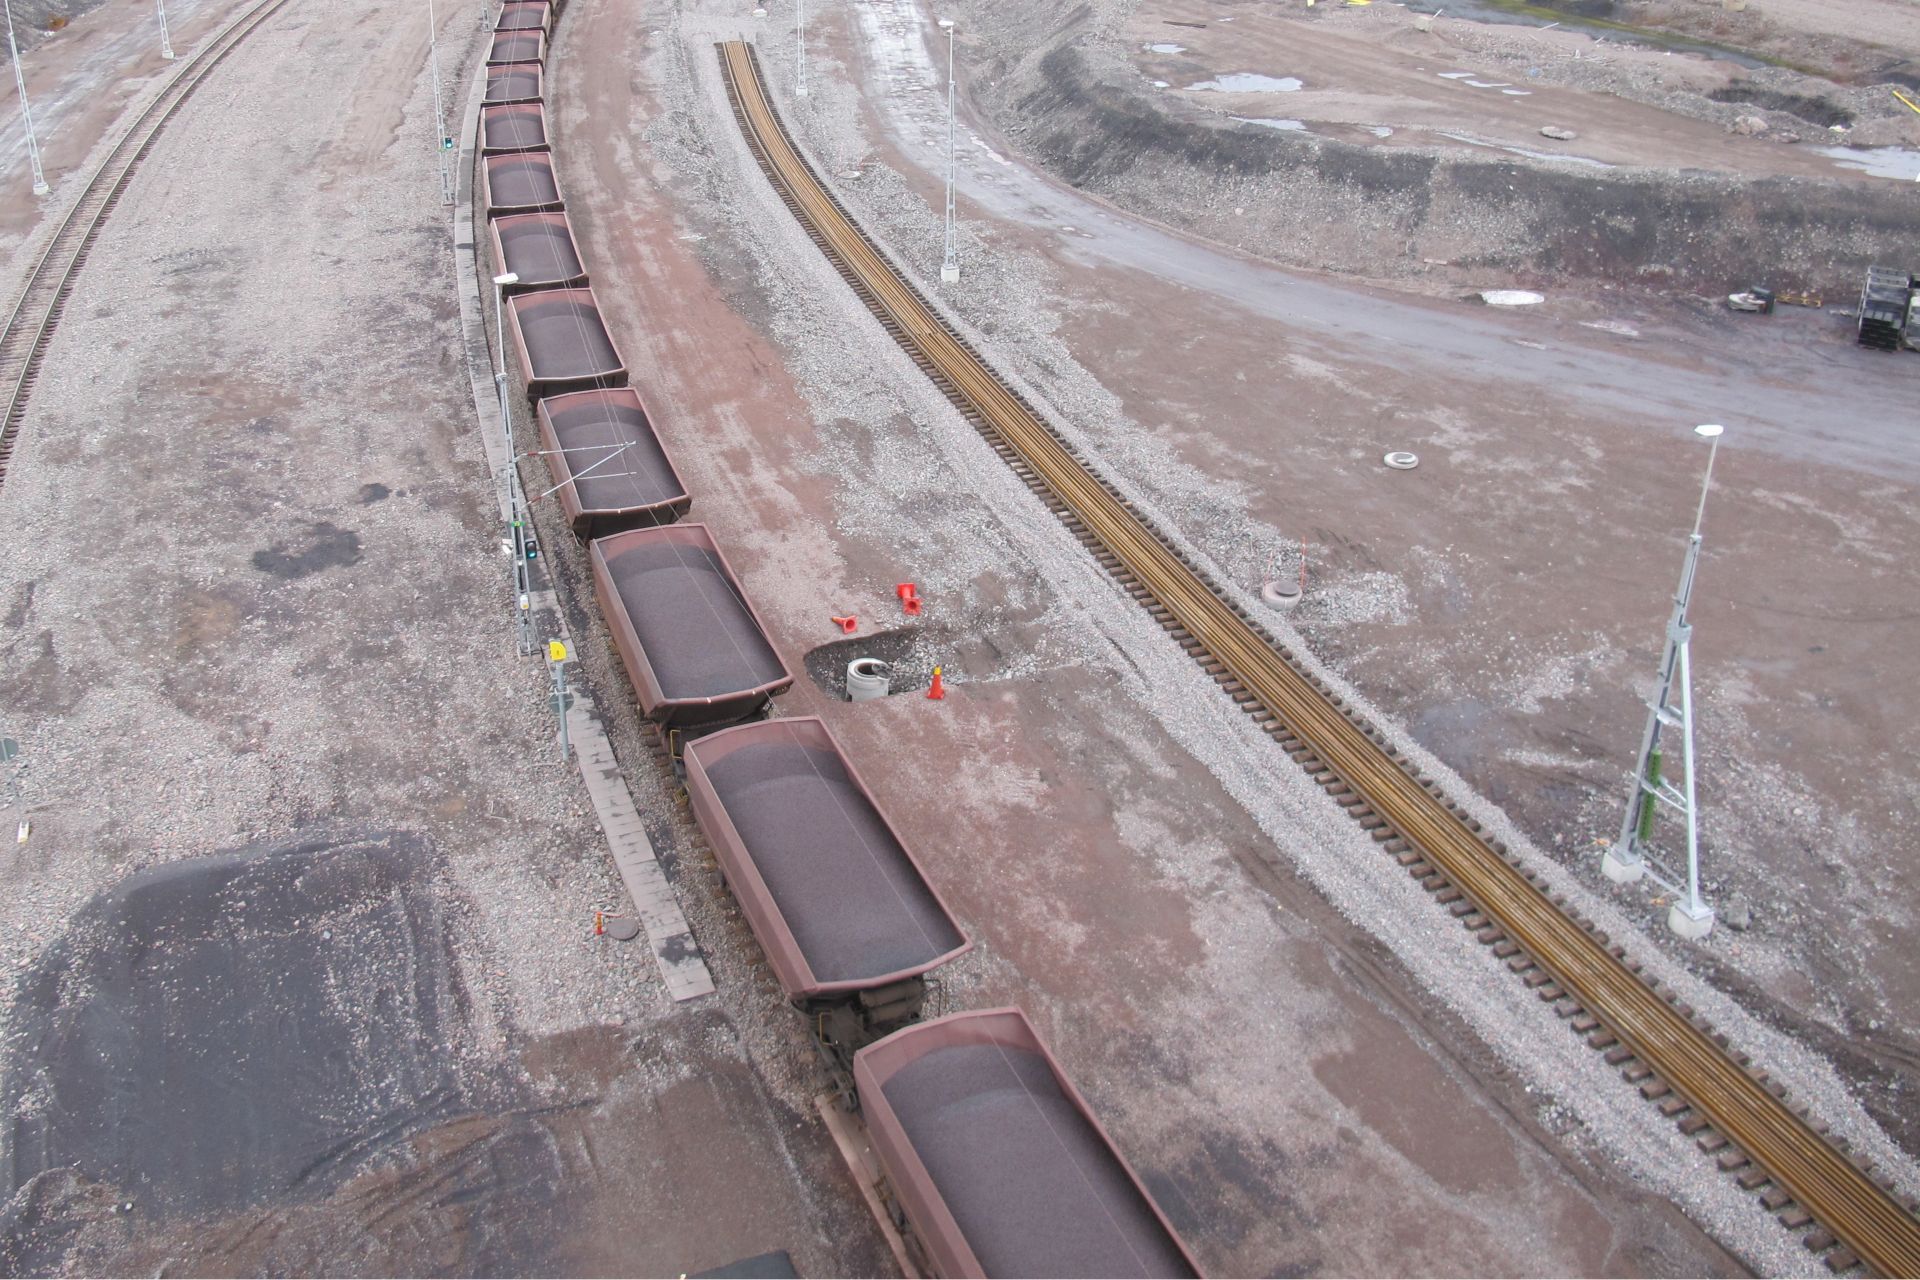 Iron ore in form of fines and pellets is transported by rail to the ports of Narvik in Norway and Luleå, Sweden